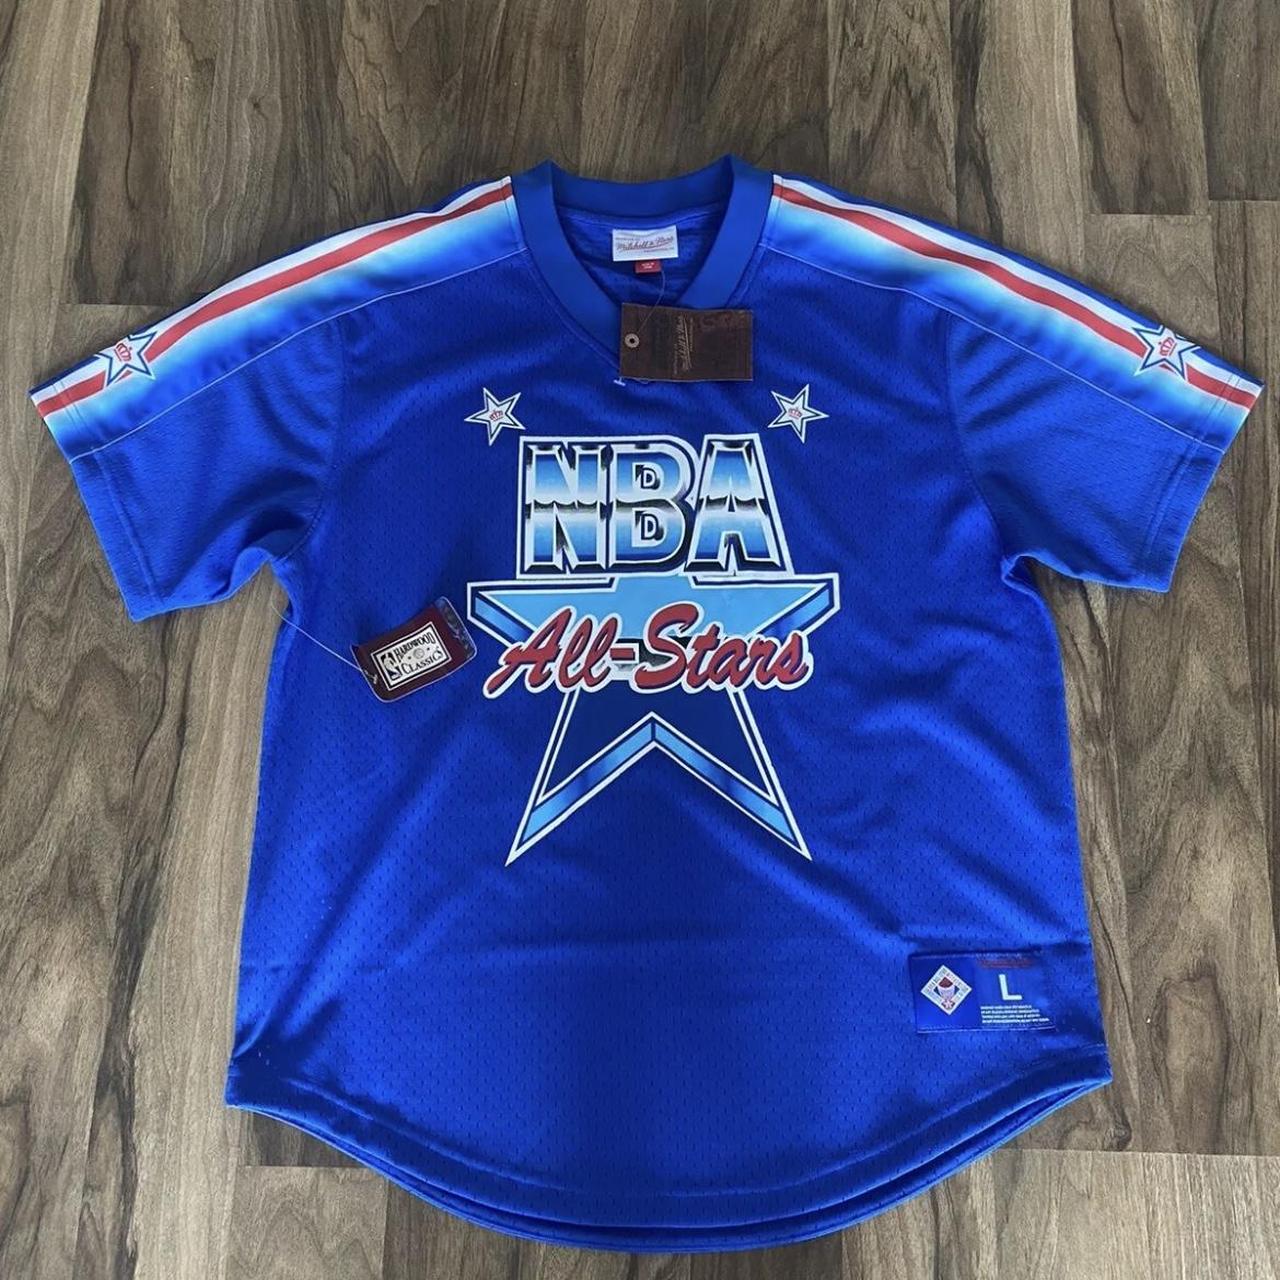 mitchell and ness nba all star shirt